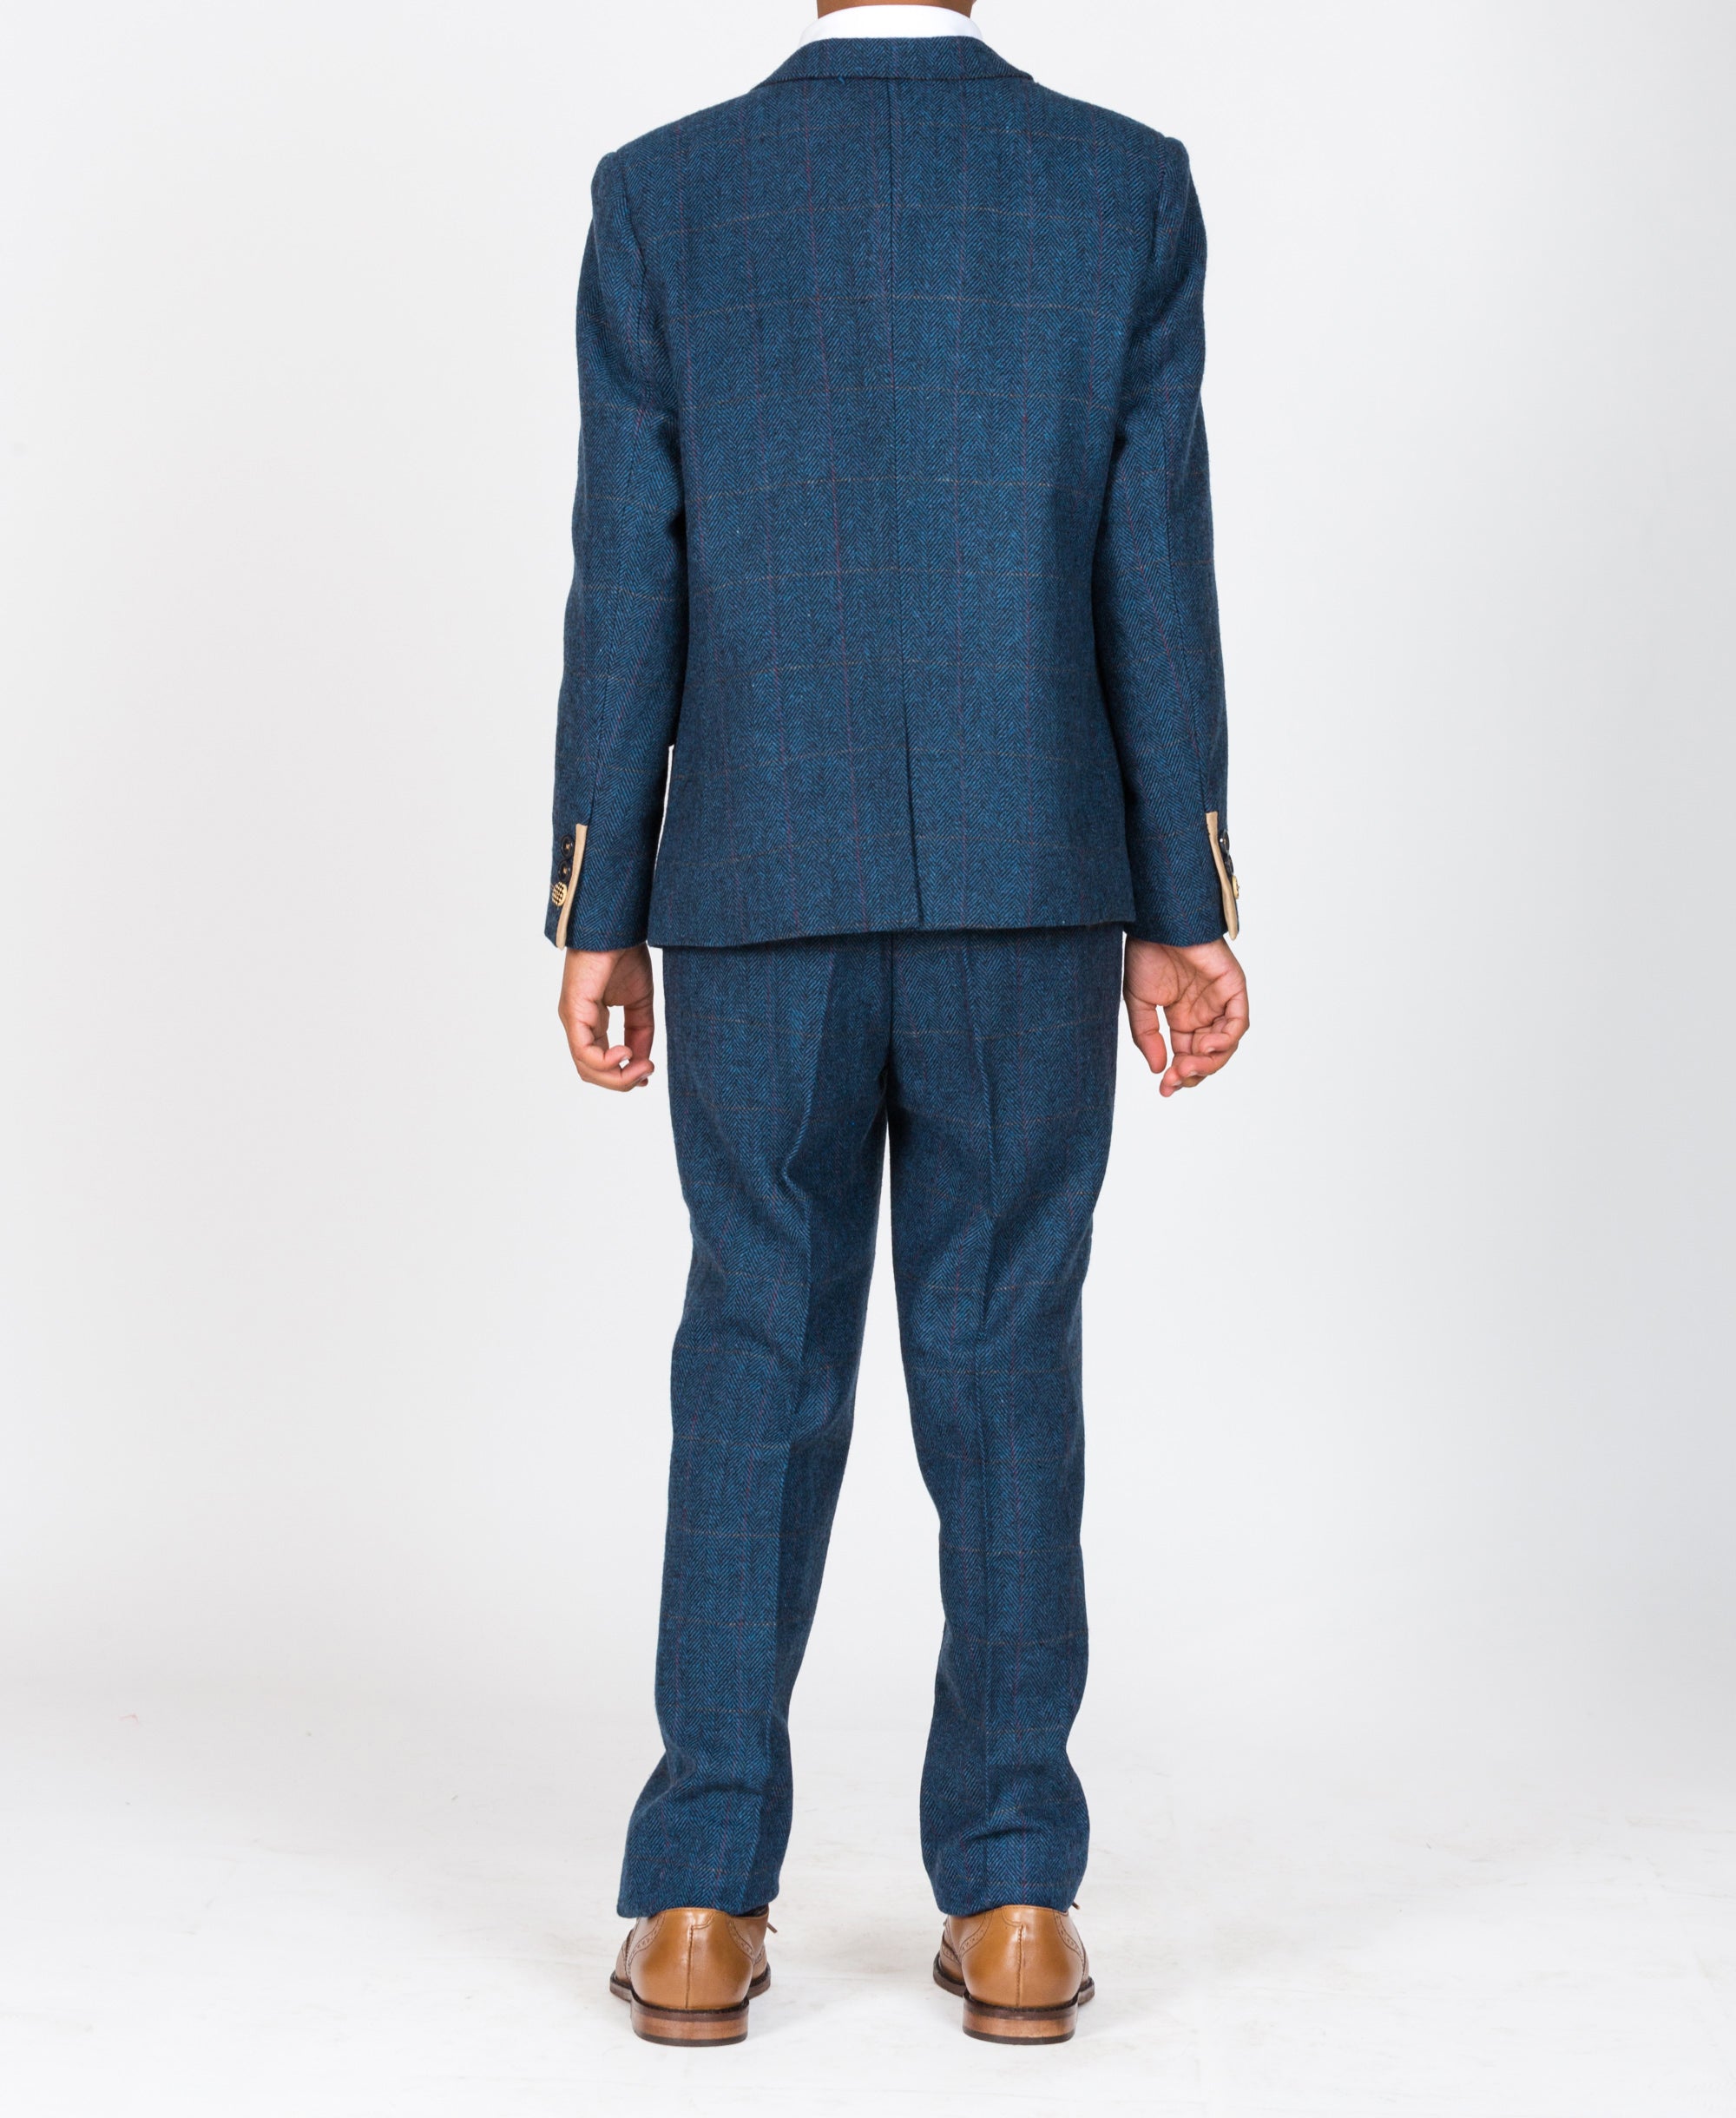 Marc darcy Dion Blue checked children's Tweed Suit